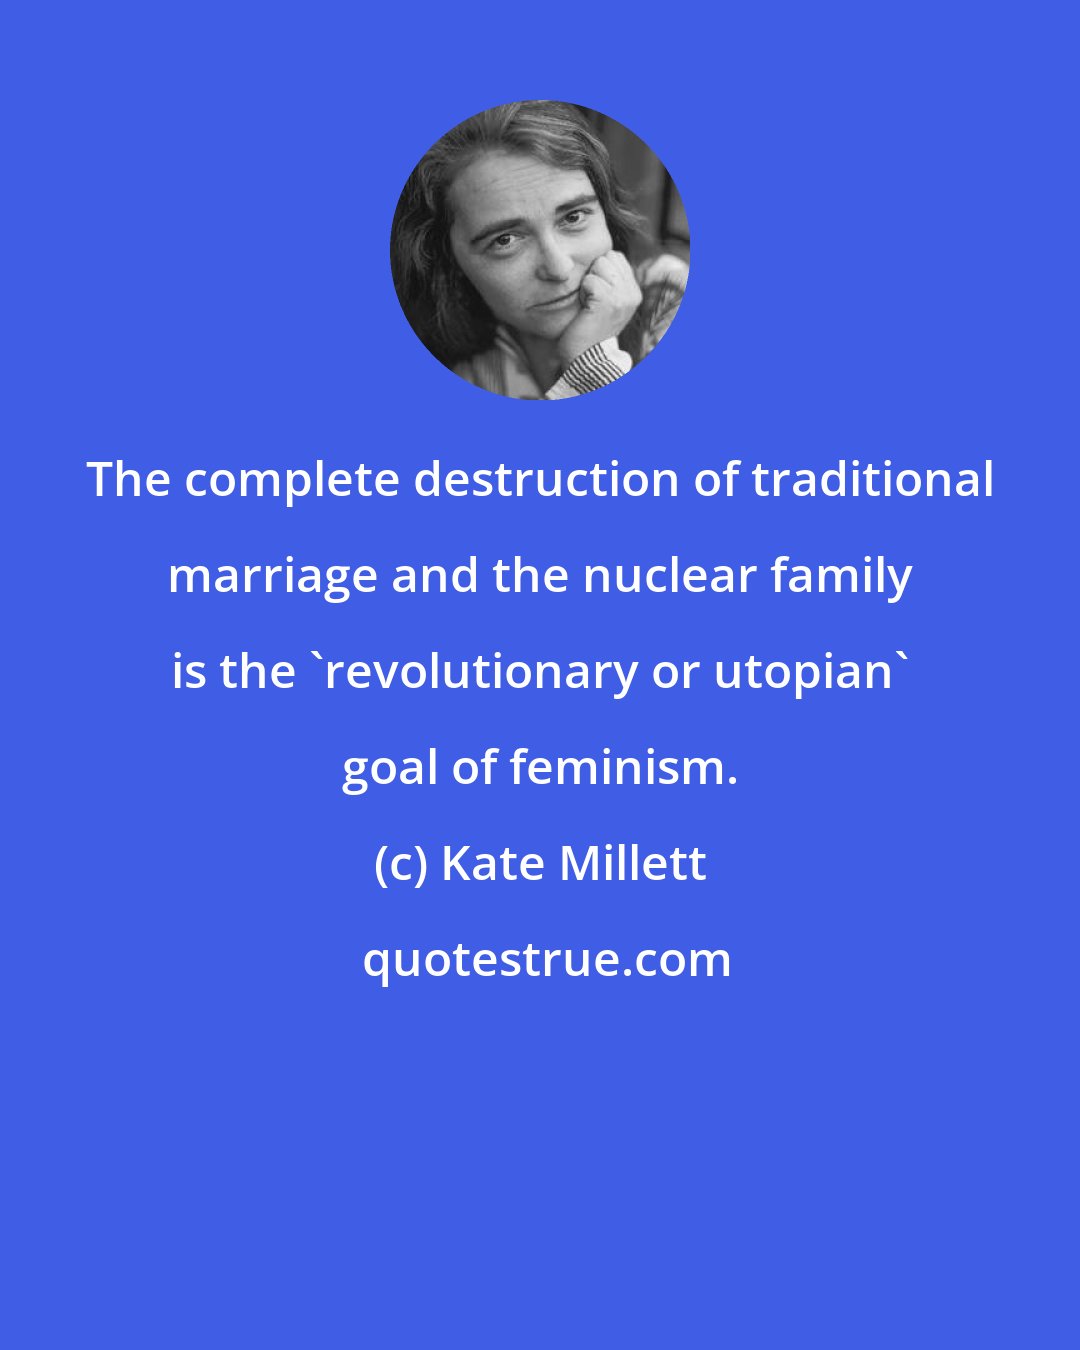 Kate Millett: The complete destruction of traditional marriage and the nuclear family is the 'revolutionary or utopian' goal of feminism.